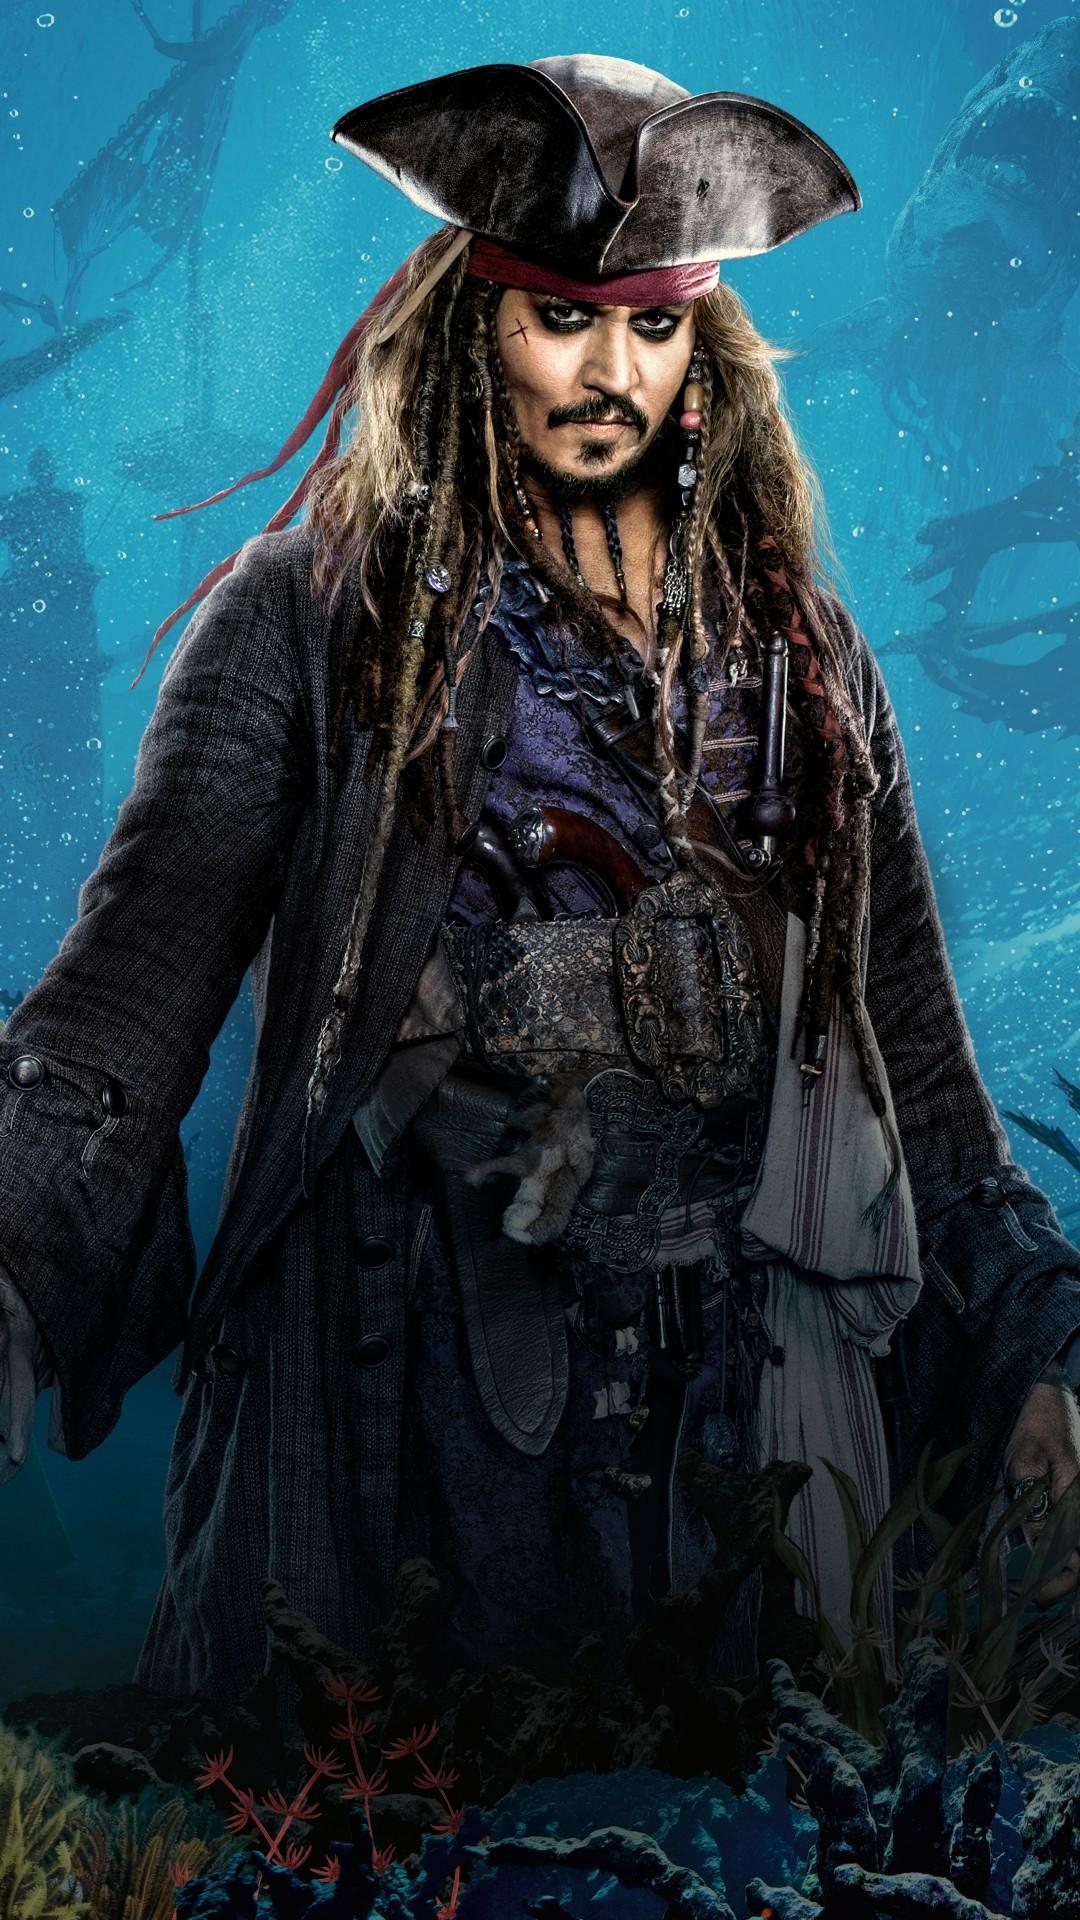 Android Full HD Jack Sparrow Wallpapers - Wallpaper Cave